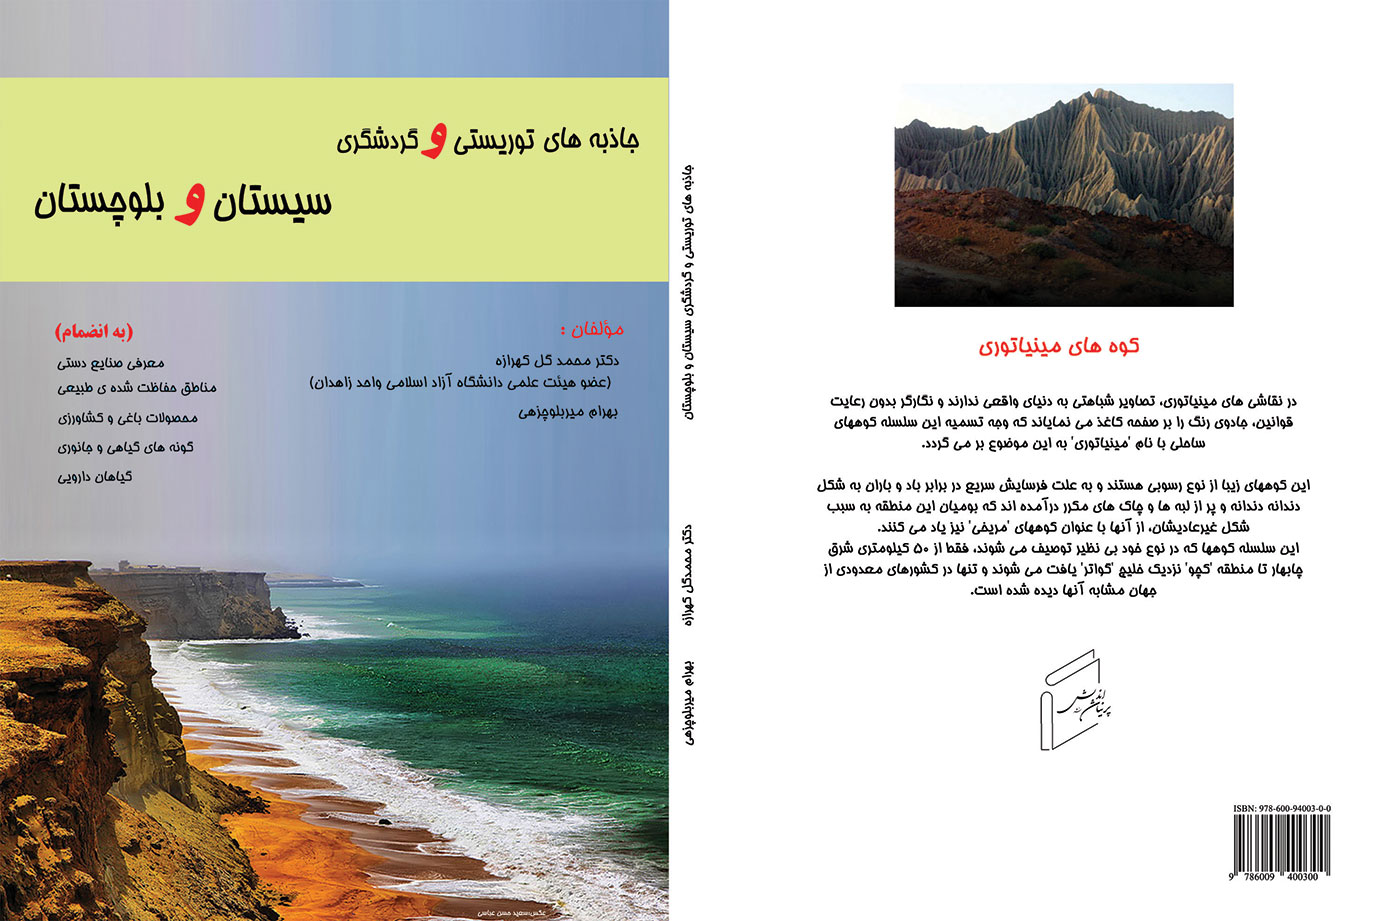 Natural attractions and tourism of Sistan and Baluchistan has been published.